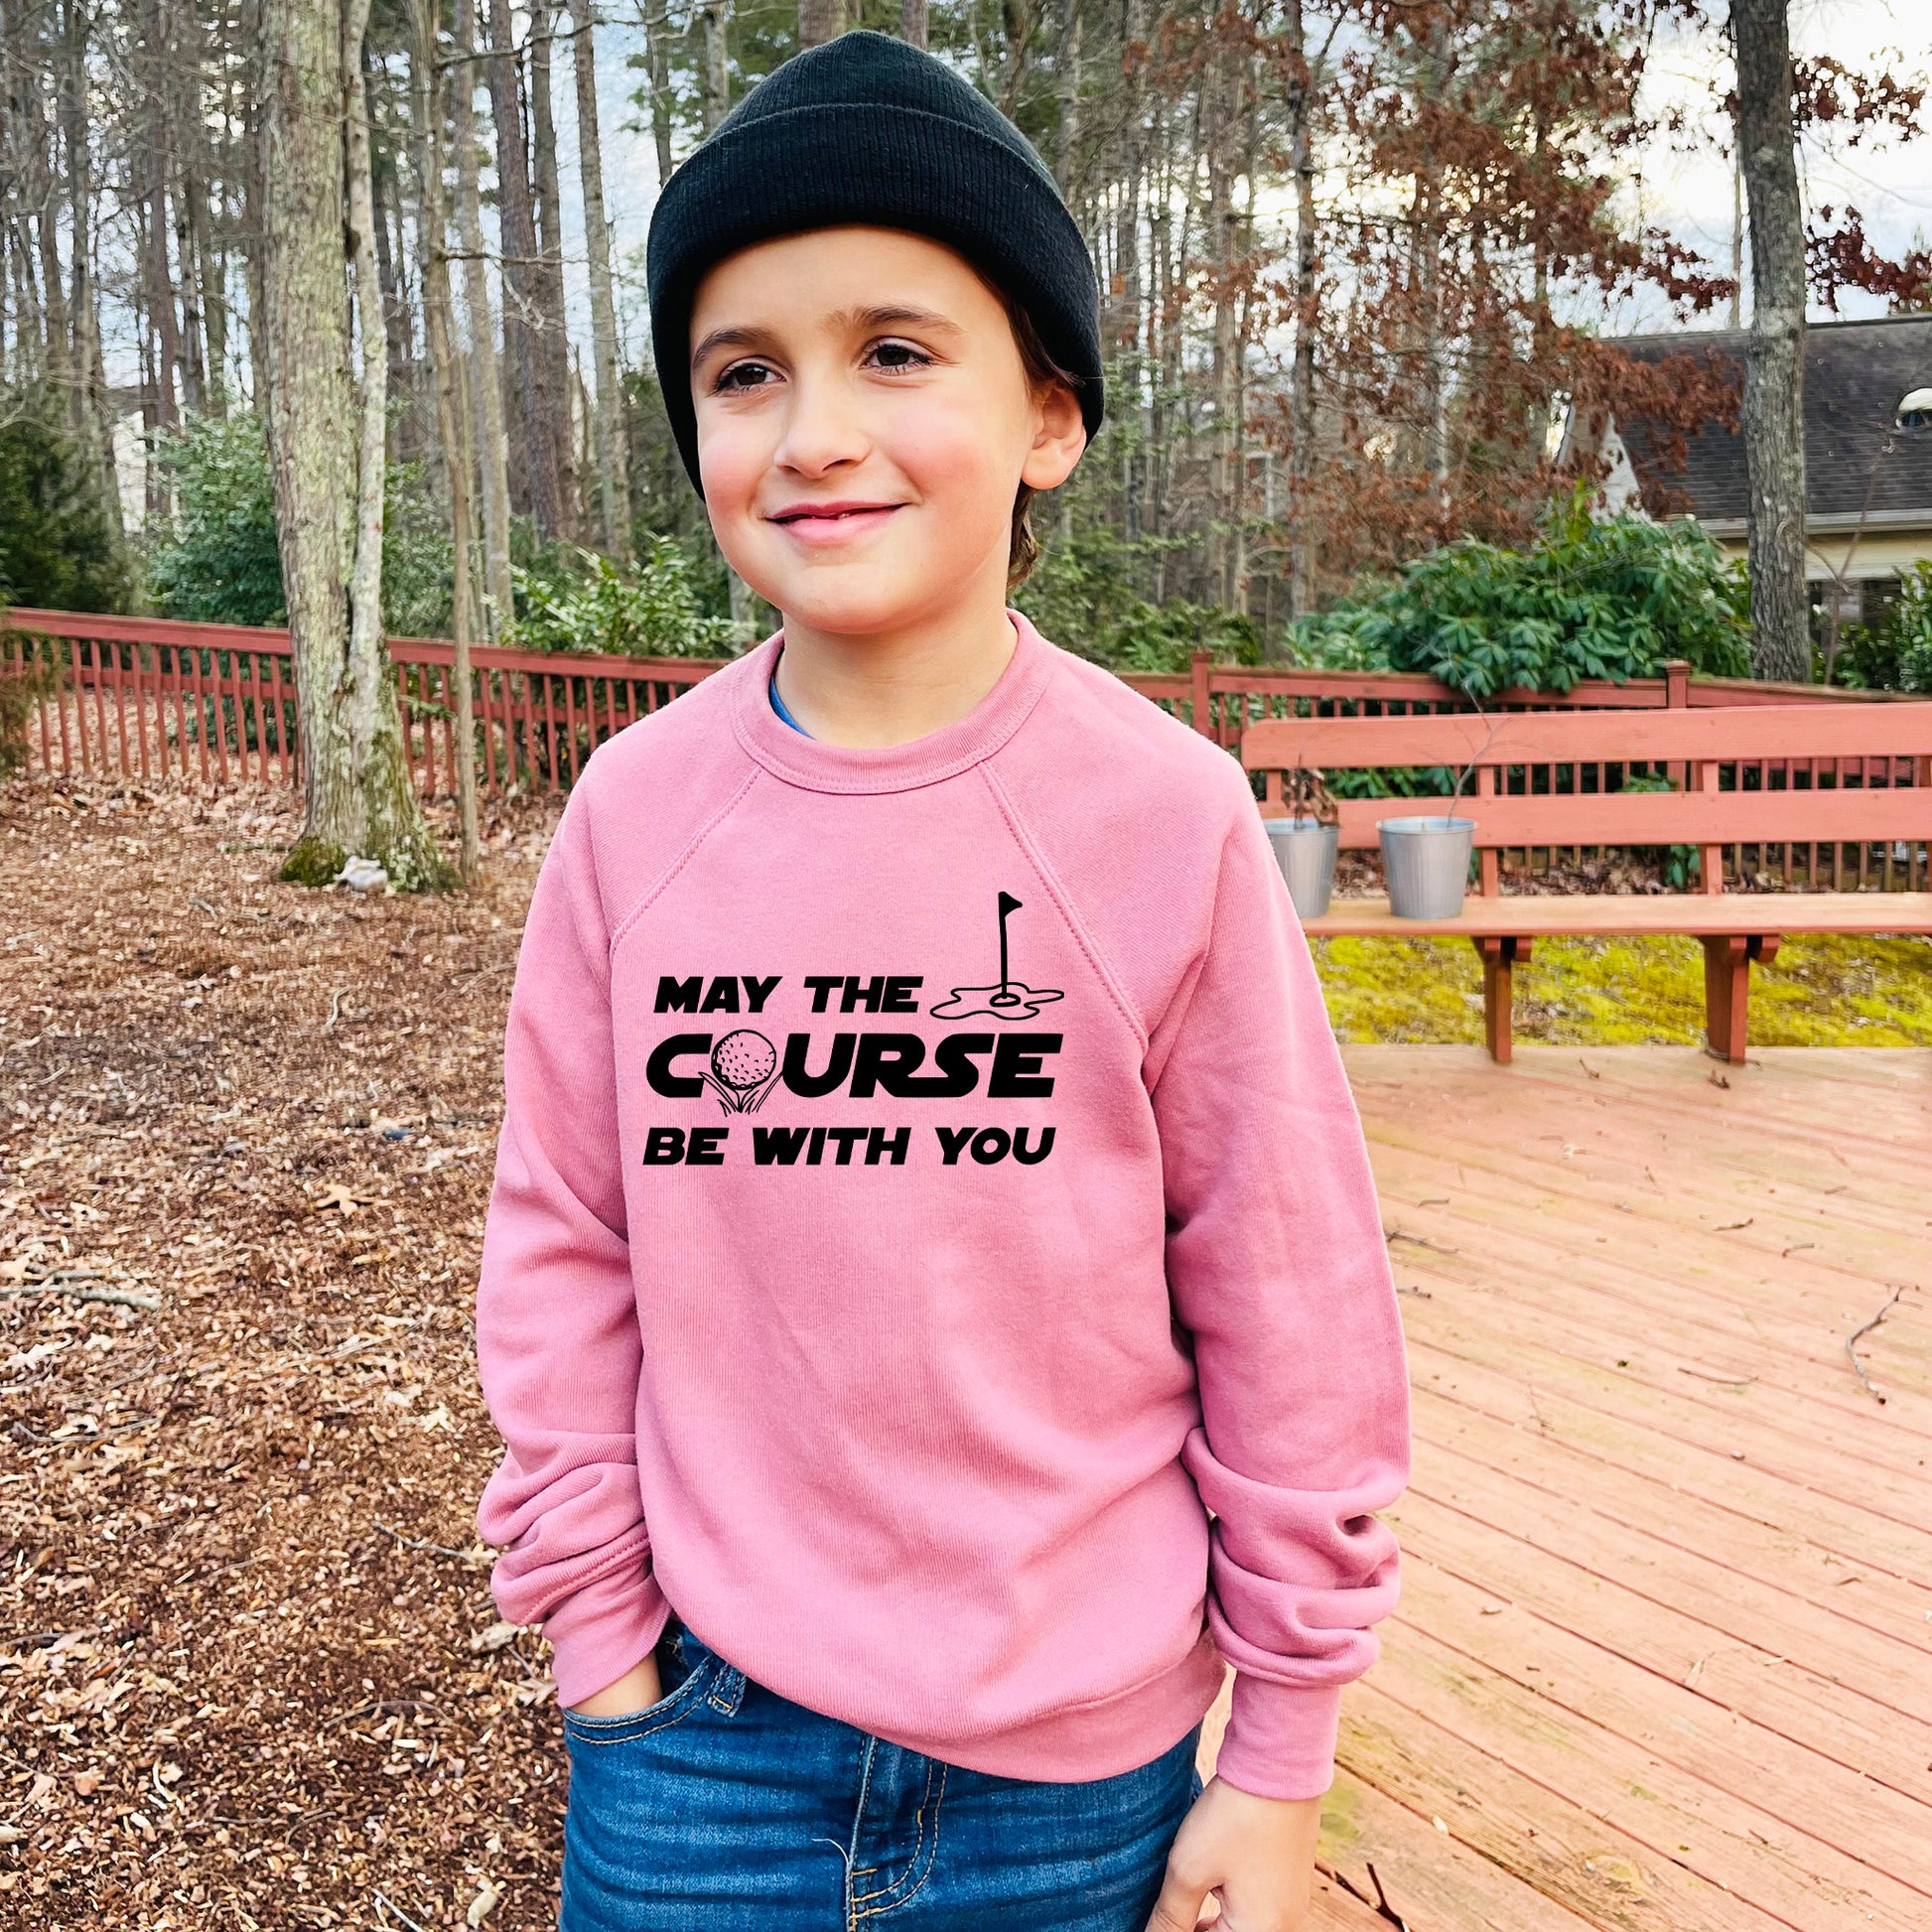 a young boy wearing a pink sweatshirt that says may the course be with you